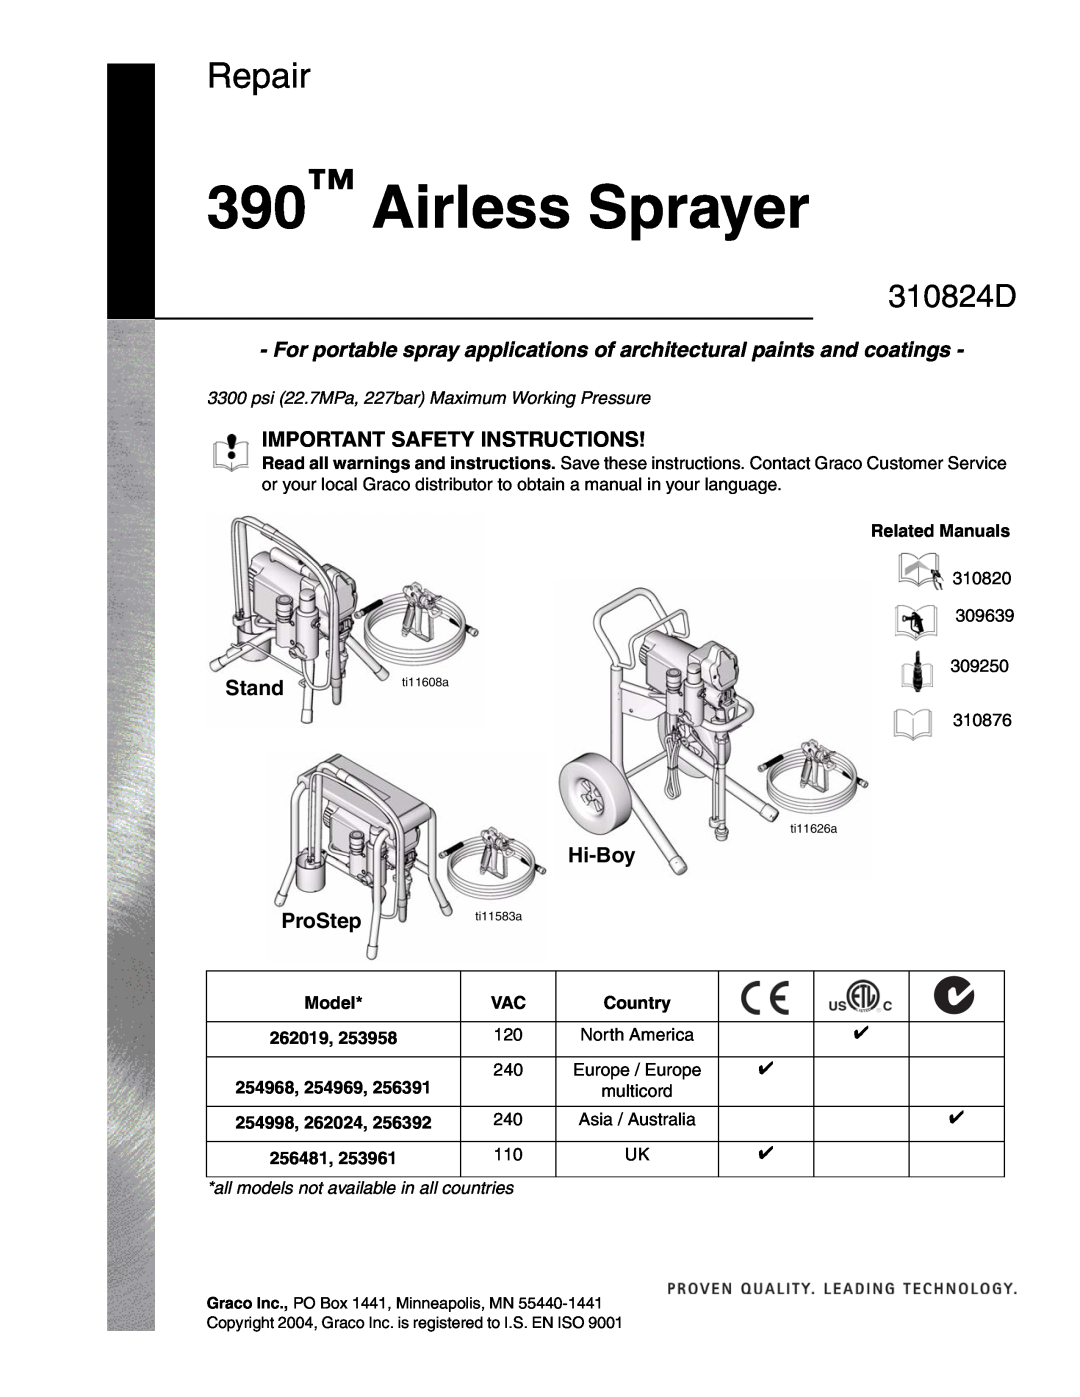 Graco Inc 309250 important safety instructions For portable spray applications of architectural paints and coatings, Stand 